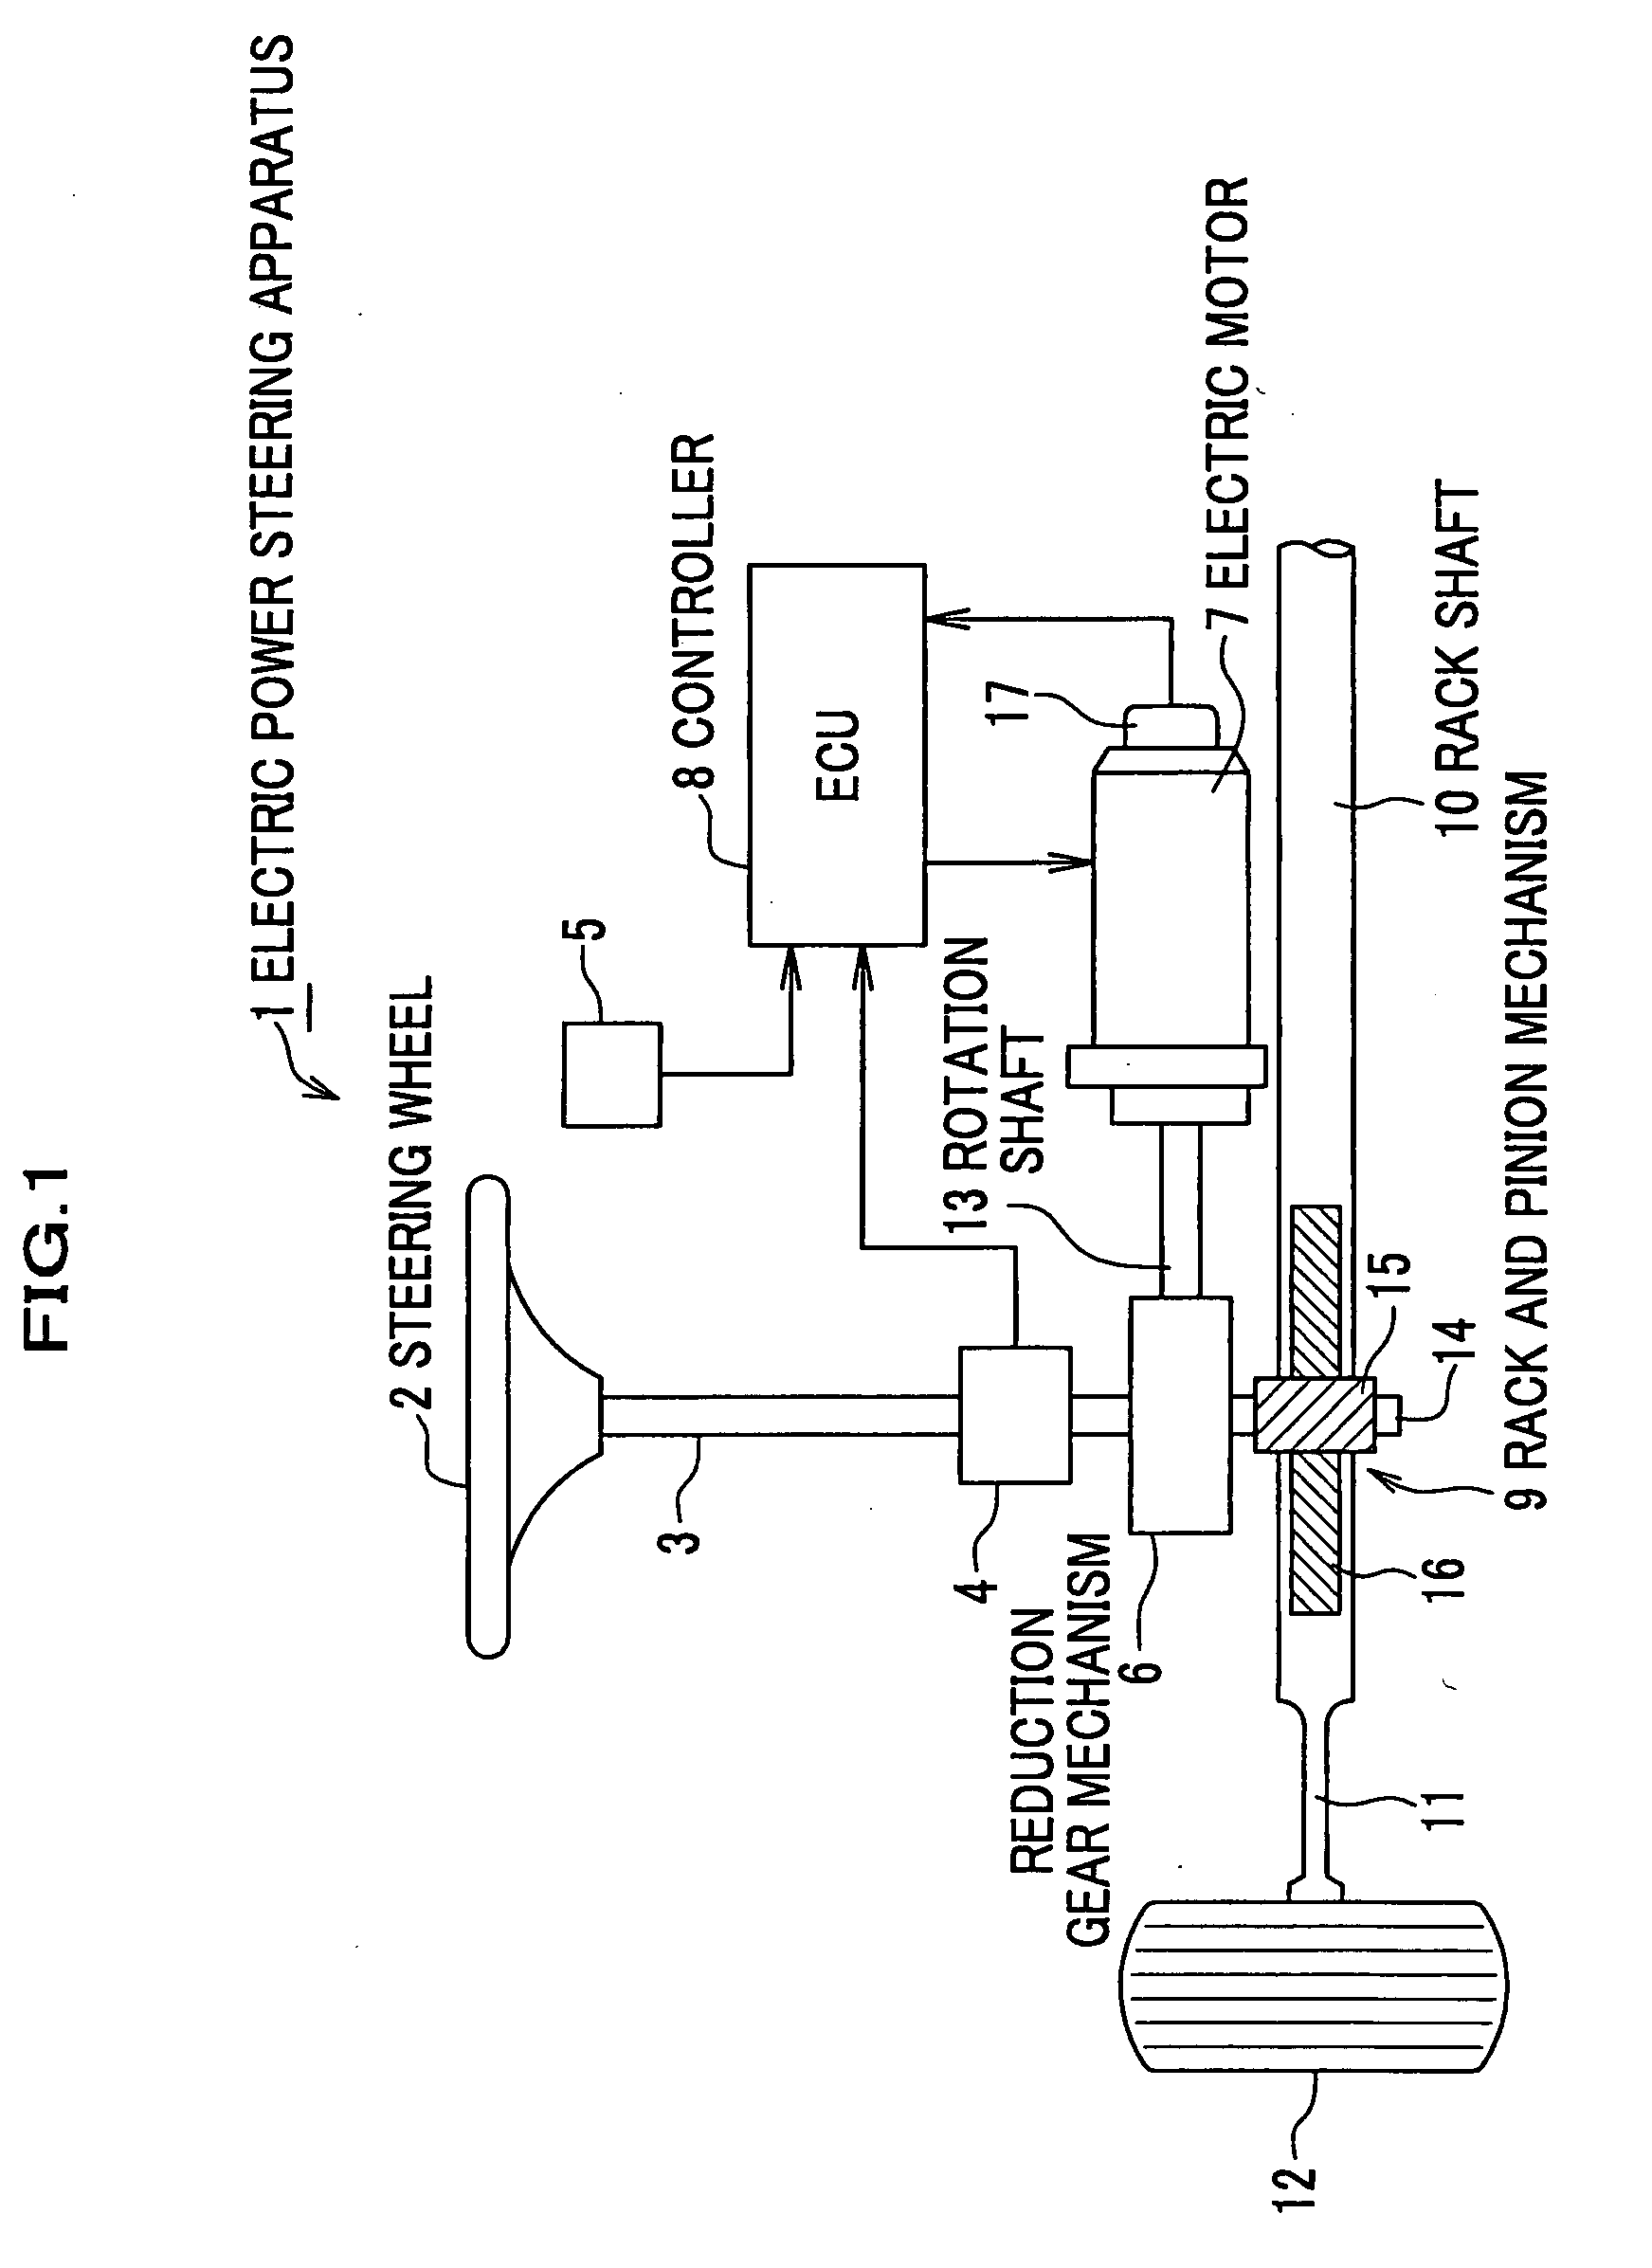 Electric motor and electric power steering apparatus